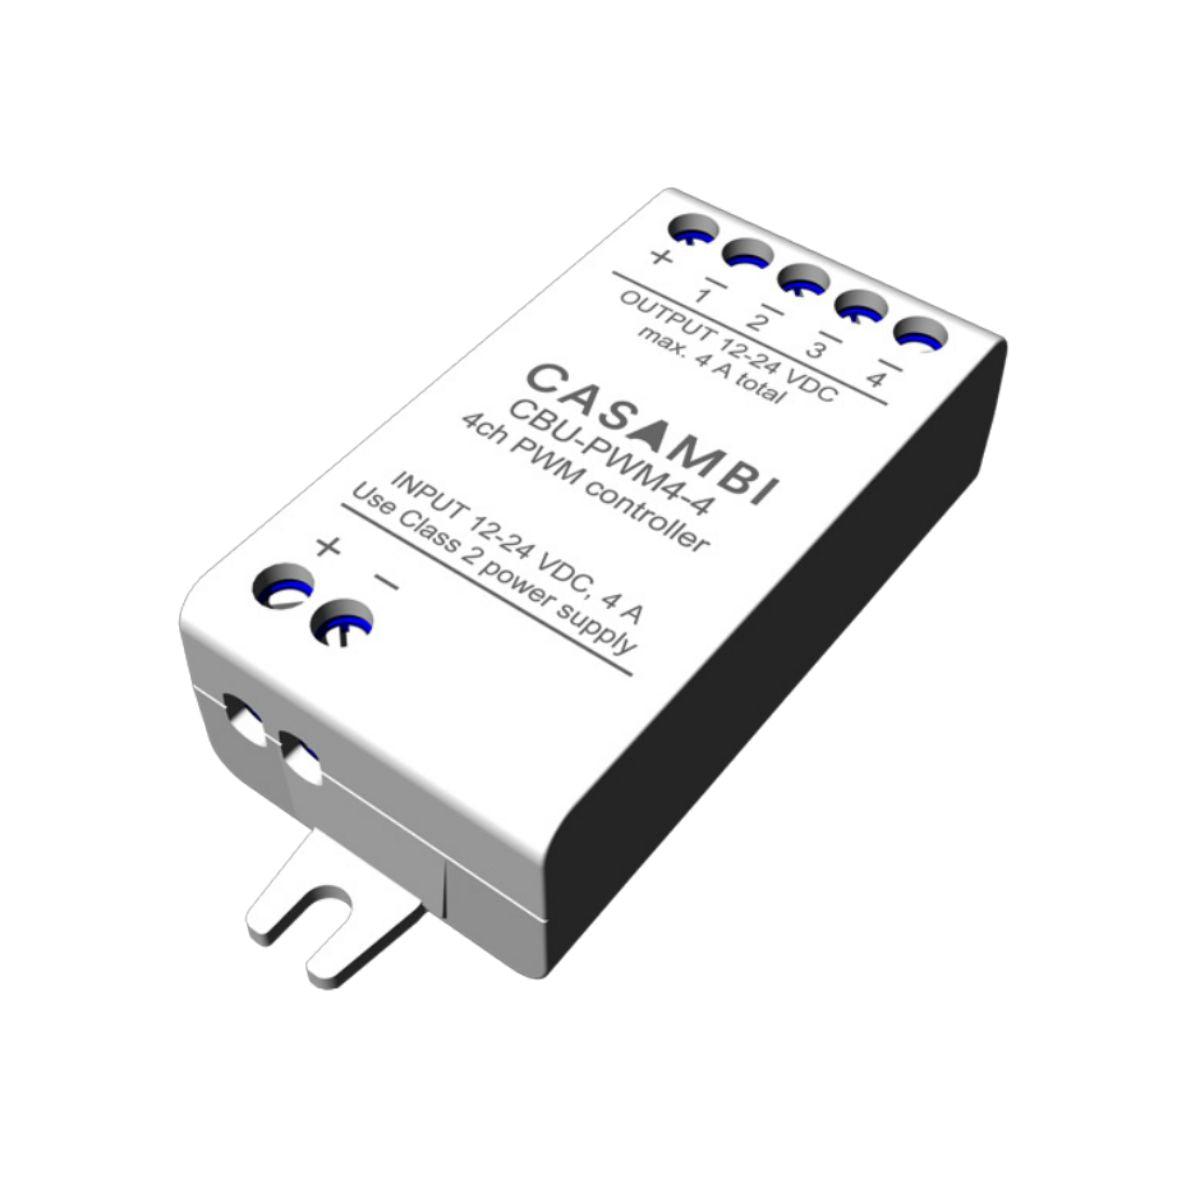 Casambi PWM4 Bluetooth LED Controller, 4 channels, PWM Dimmer, 12-24VDC - Bees Lighting